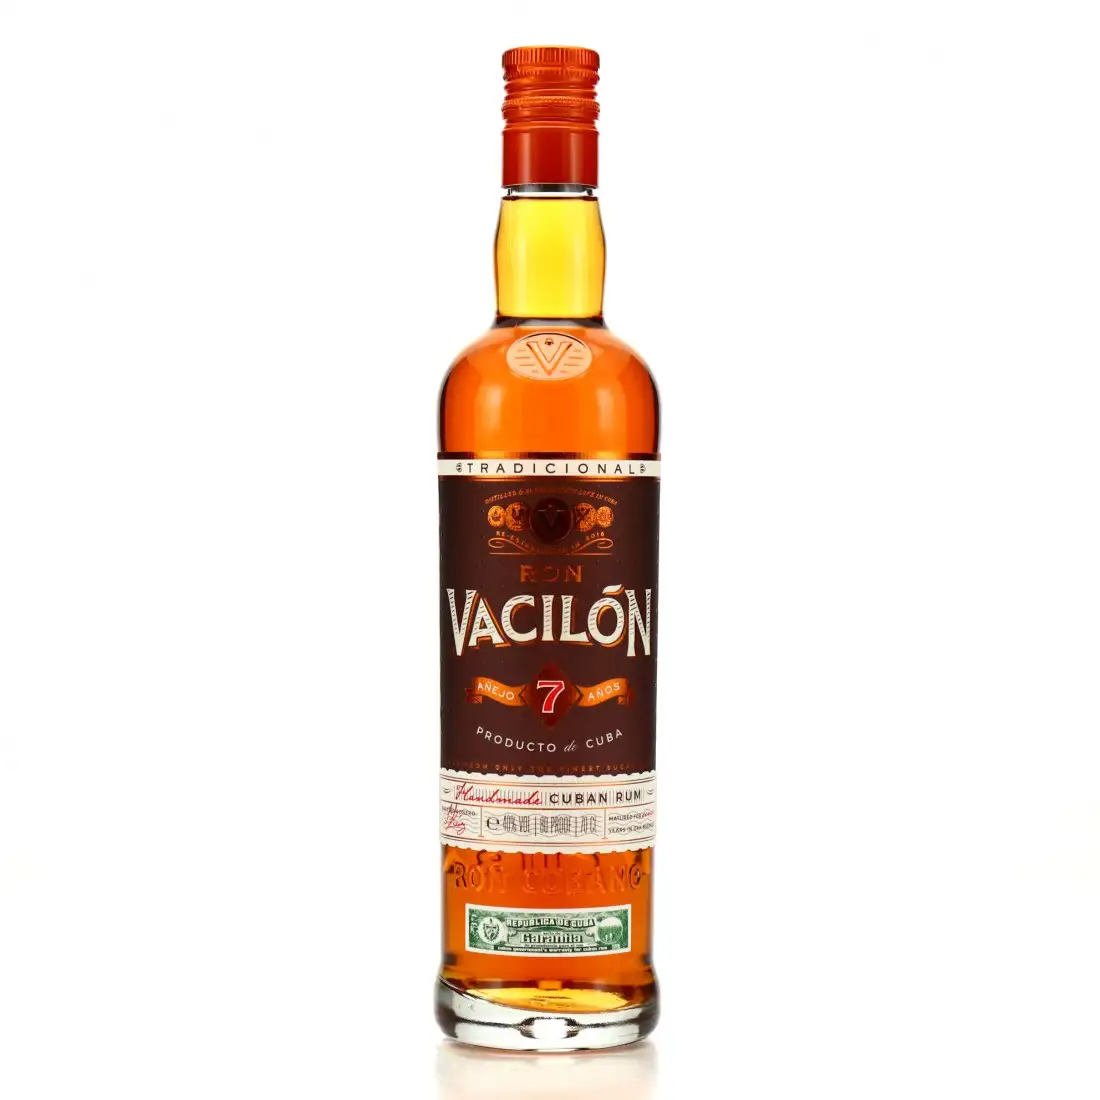 Image of the front of the bottle of the rum Vacilon Añejo 7 Años